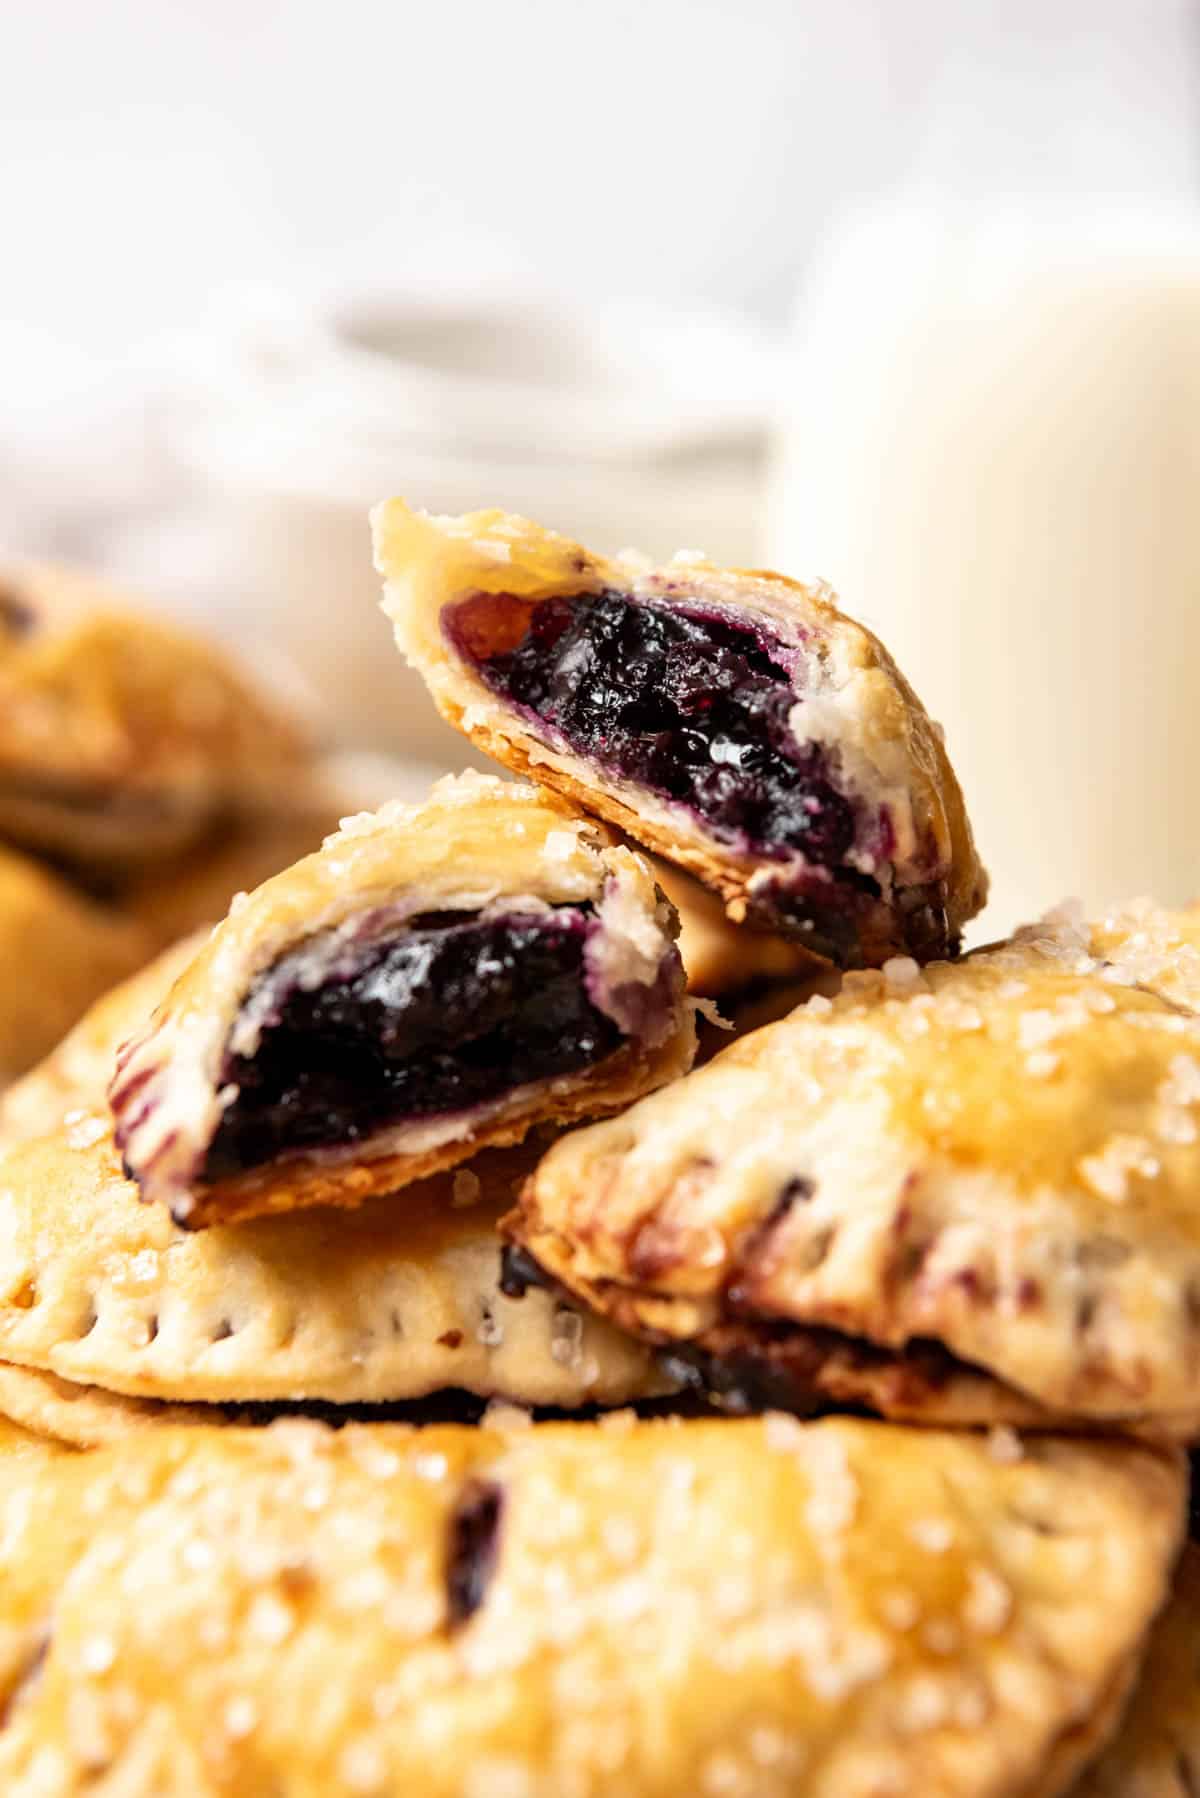 Stacked blueberry hand pies with the top one broken in half to show the filling.